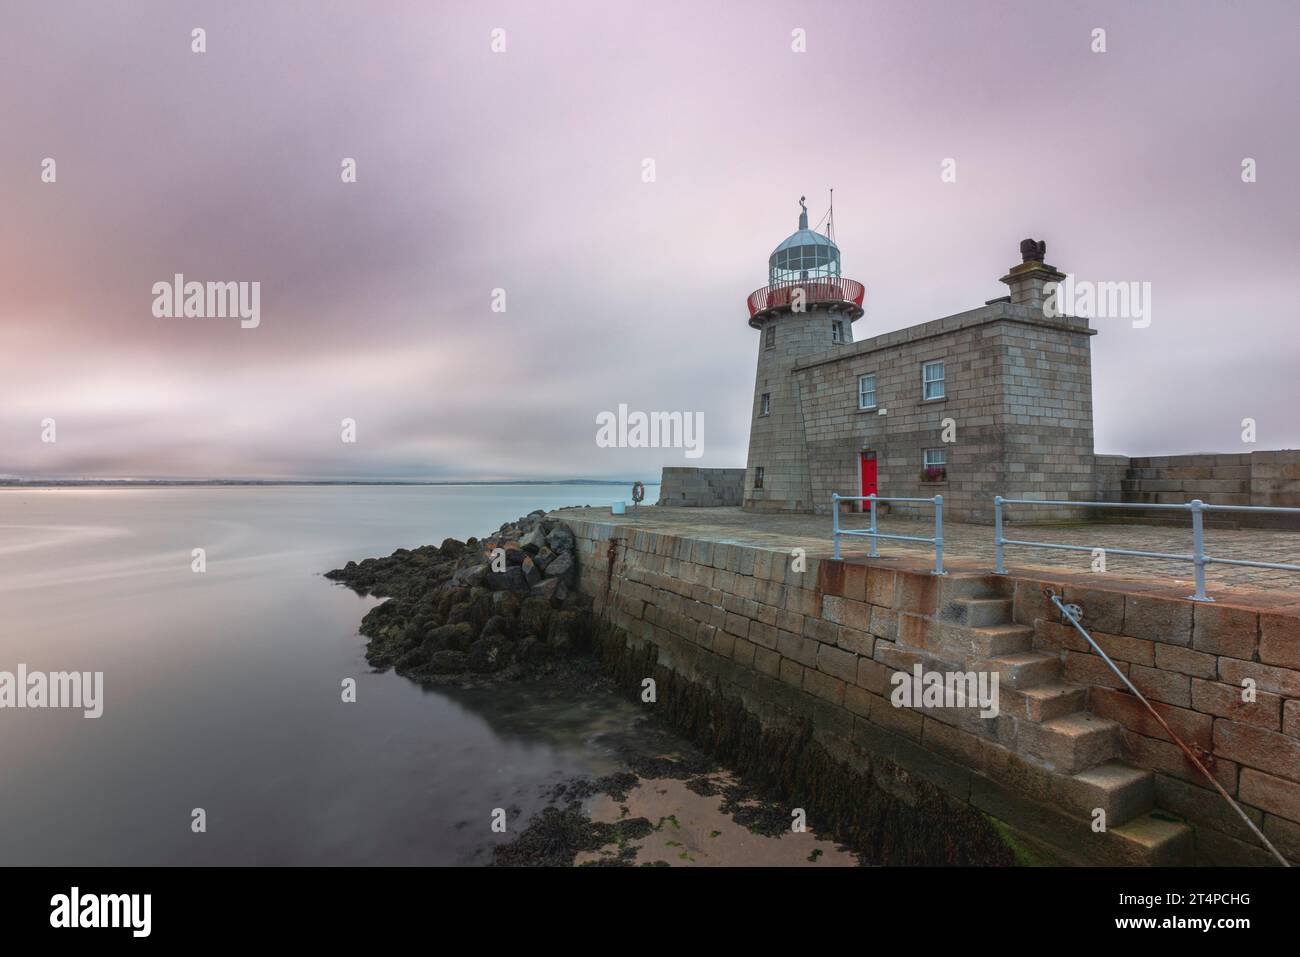 Howth Lighthouse is located on the end of the East Pier in Howth Head, Dublin, Ireland. Stock Photo